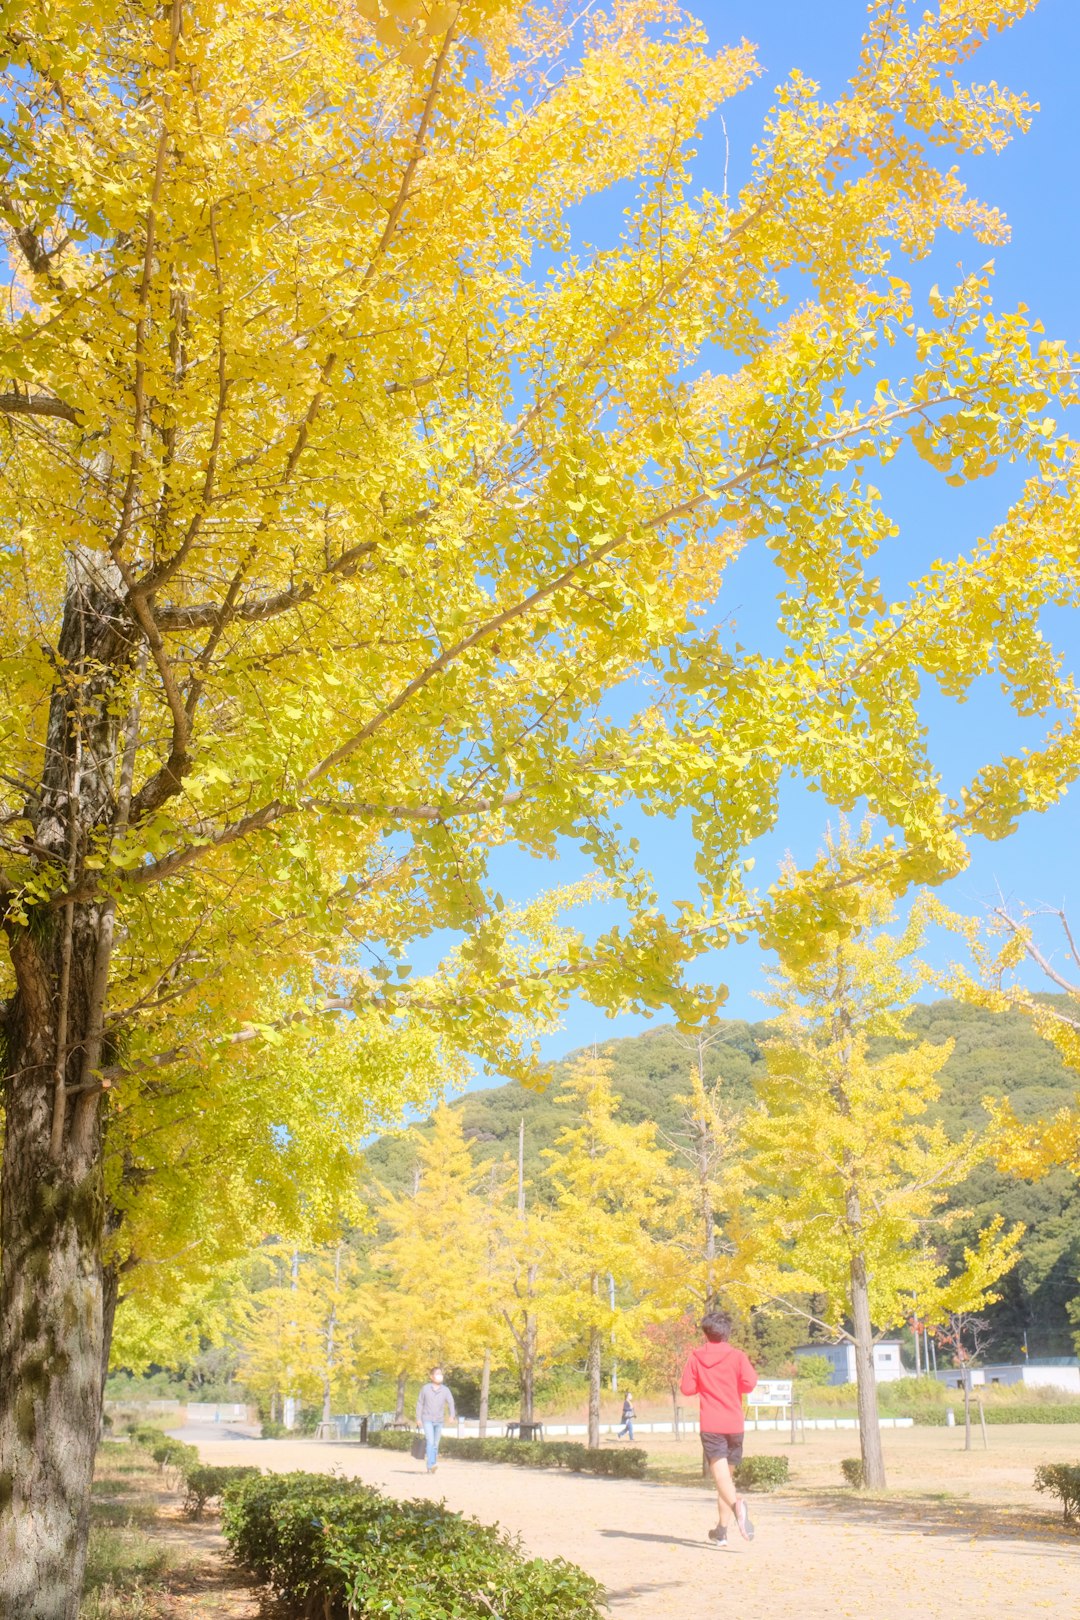 yellow and green trees under blue sky during daytime